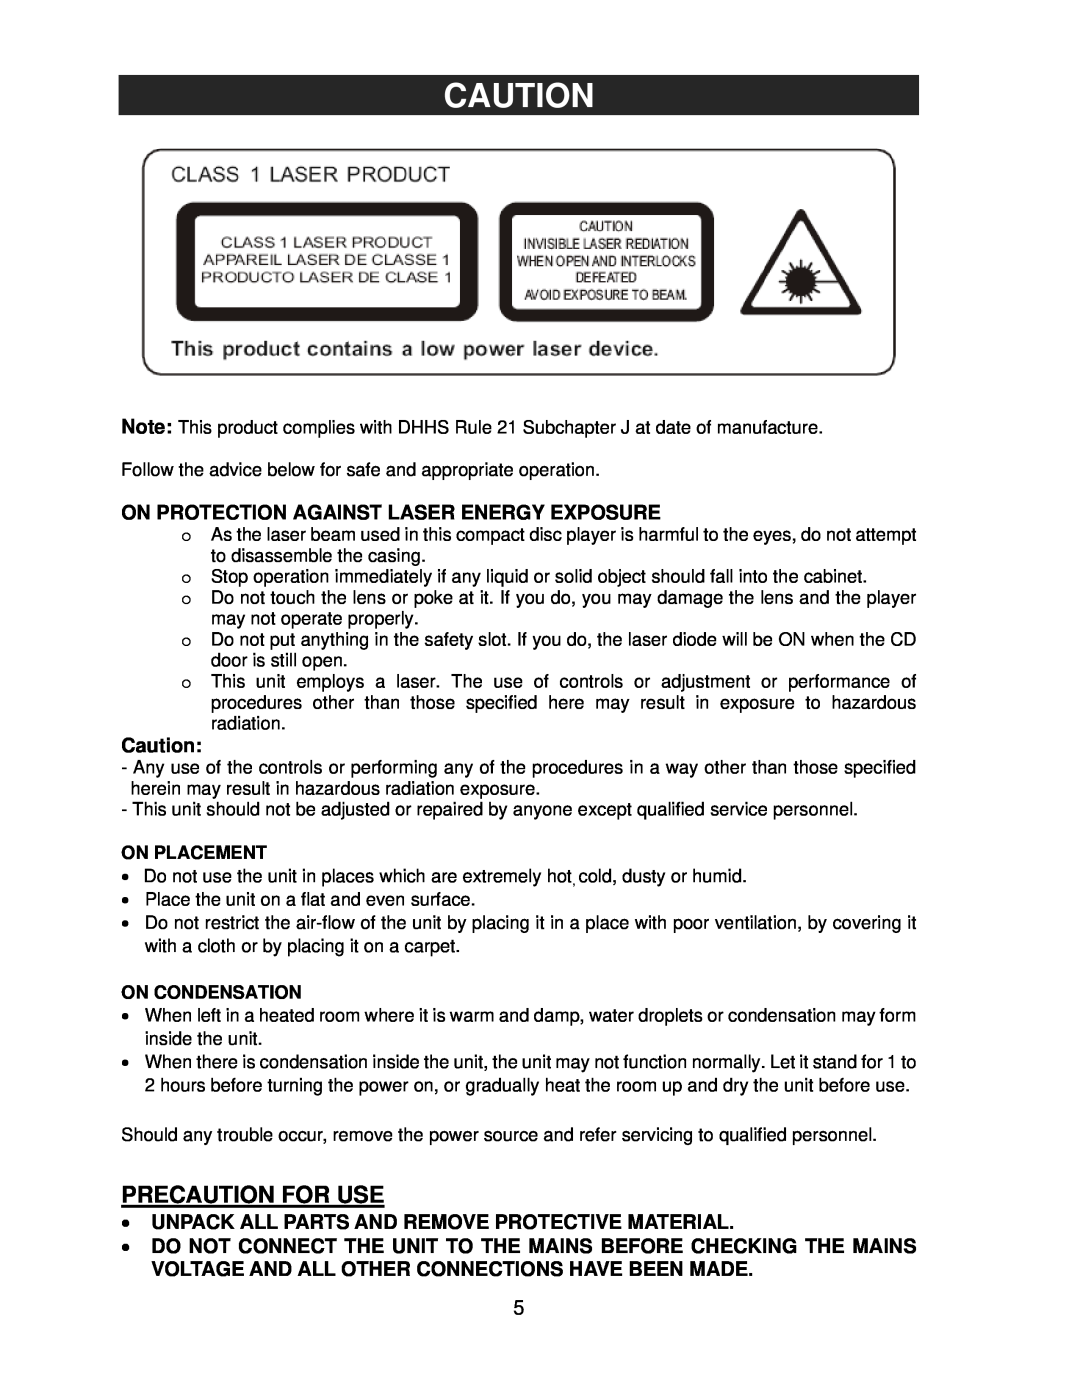 Jensen JTA-980 user manual Precaution For Use, On Protection Against Laser Energy Exposure, On Placement, On Condensation 